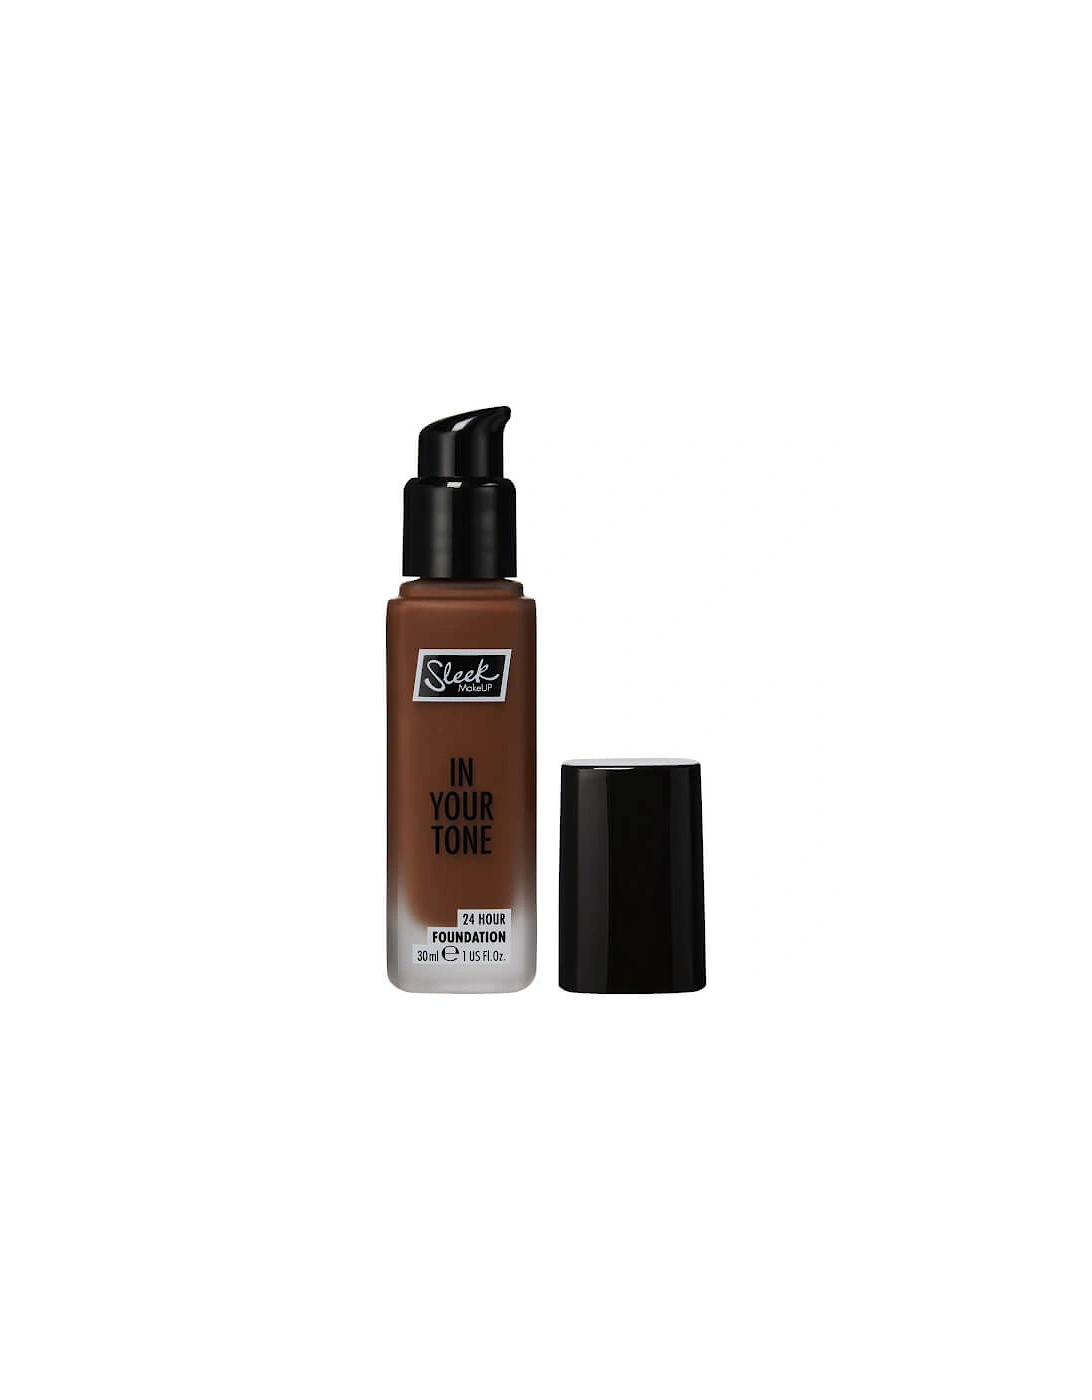 in Your Tone 24 Hour Foundation - 13C, 2 of 1